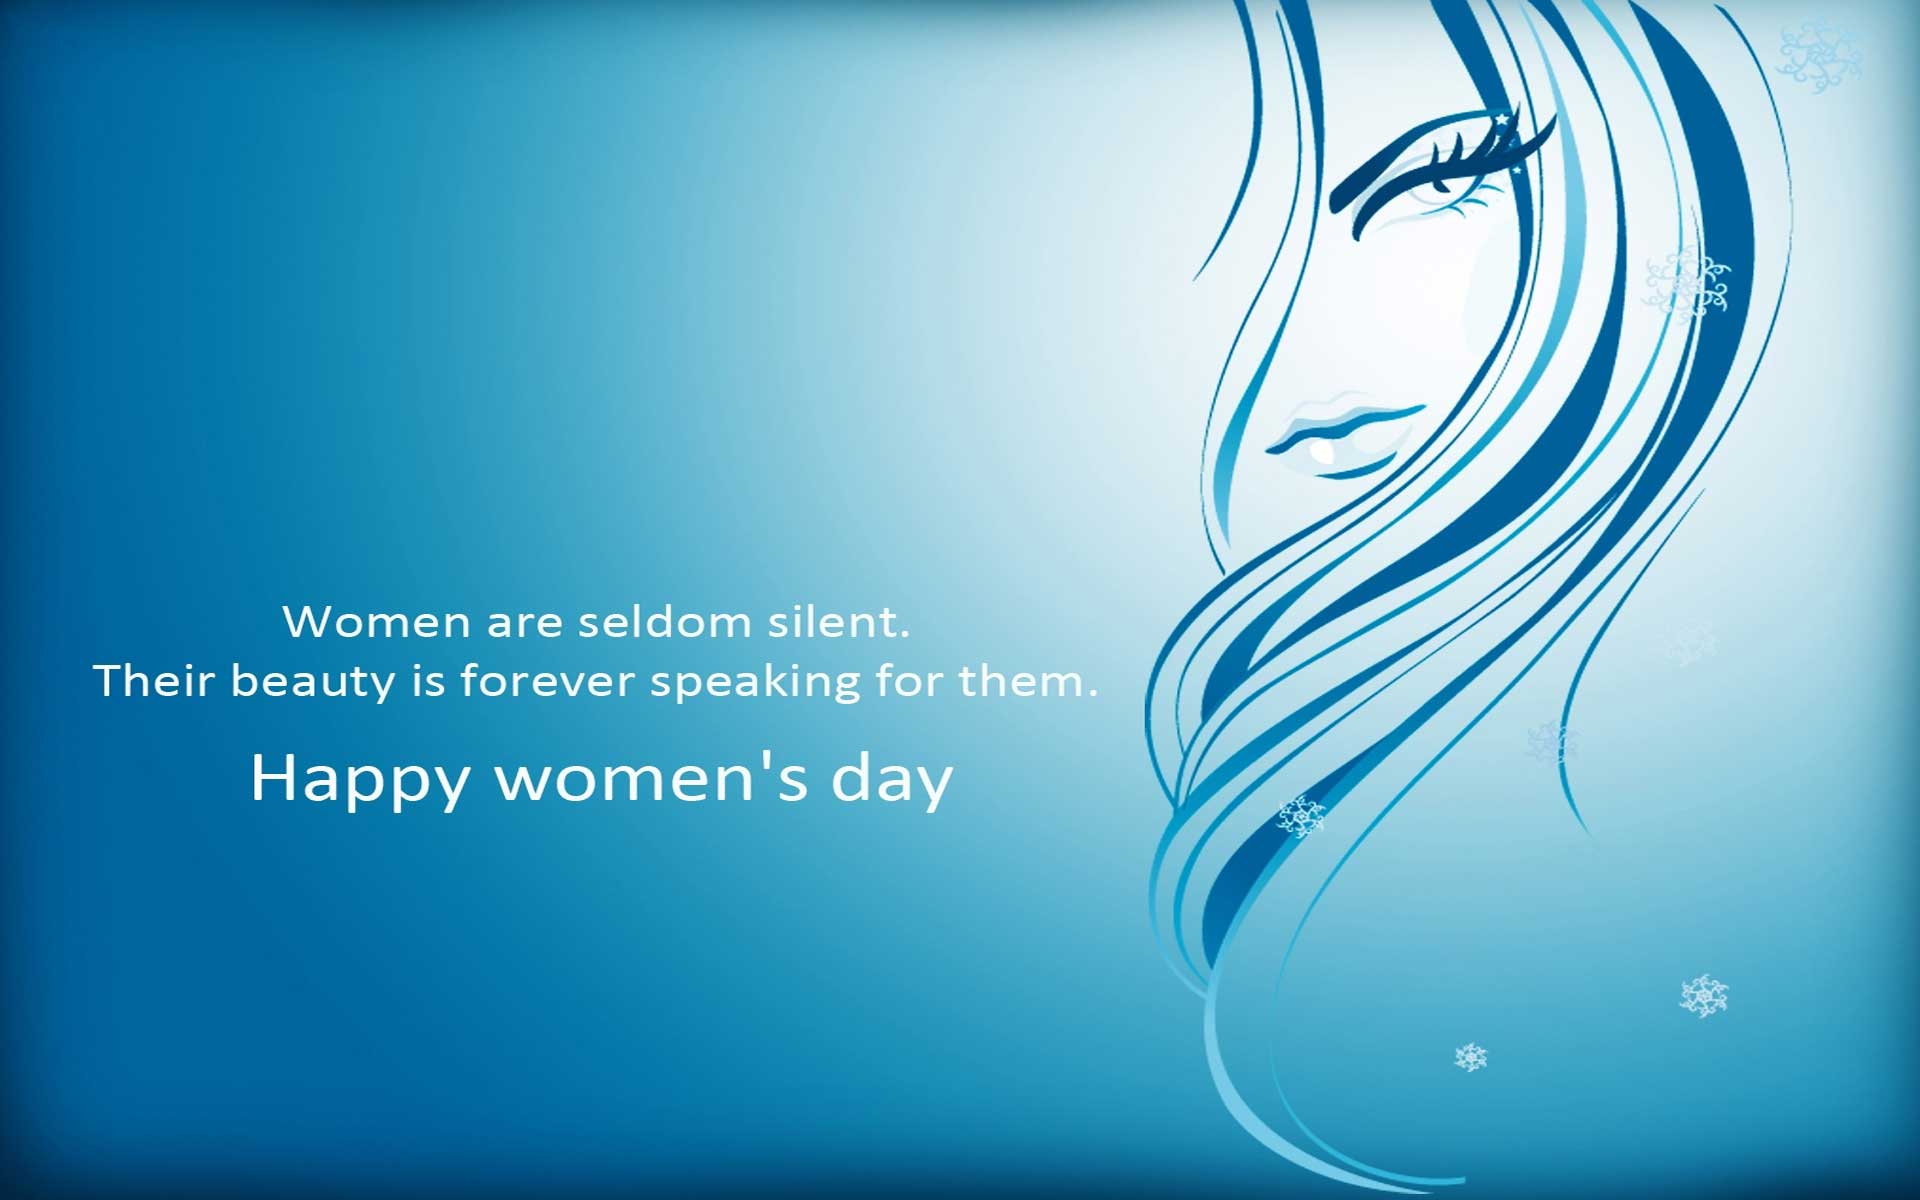 Happy Womens Day Images 2019 - Womens Day Professional Quotes - HD Wallpaper 